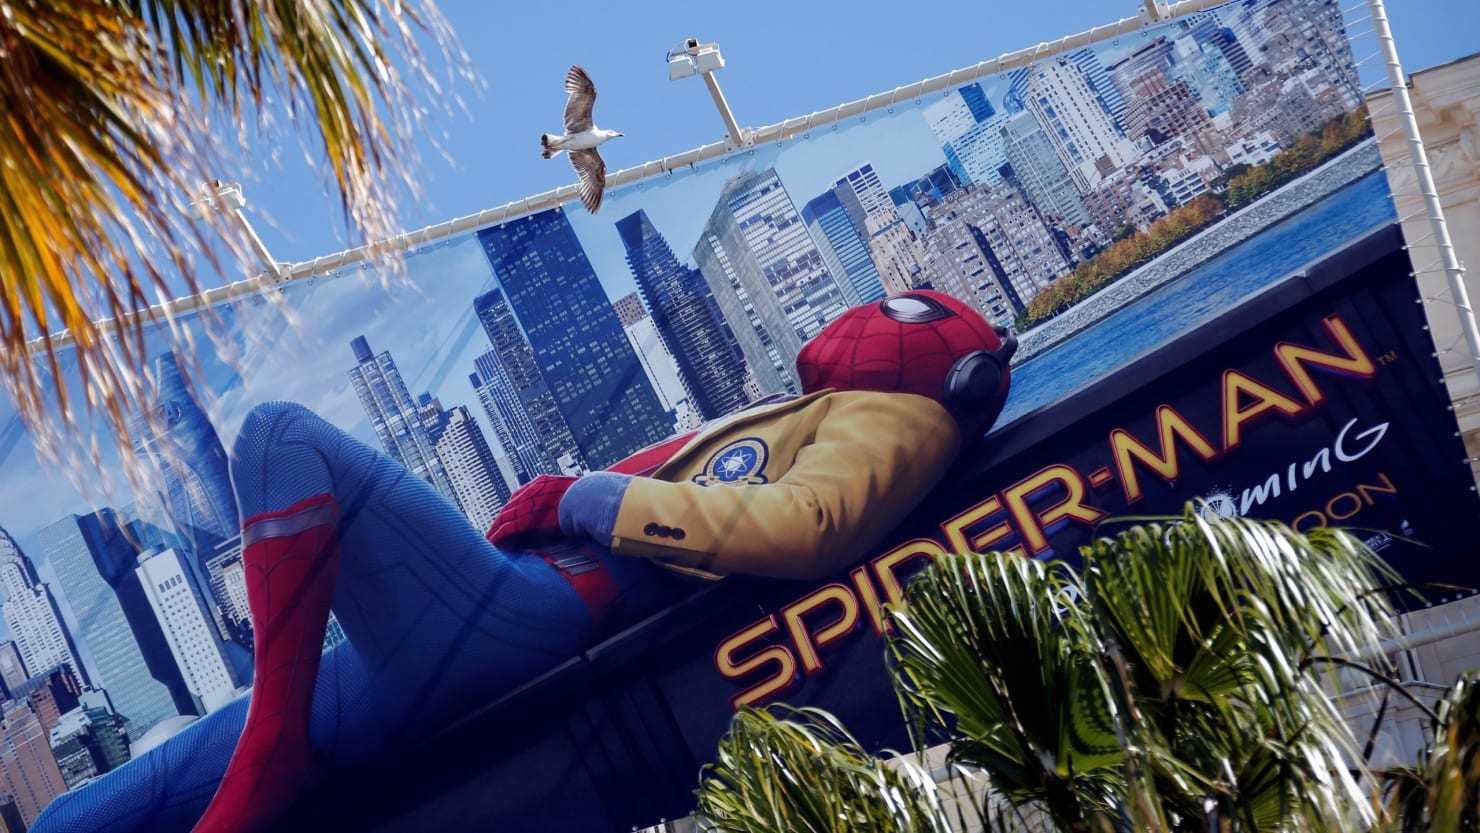 ‘Spider-Man: Homecoming’ Wins Weekend Box Office1480 x 833